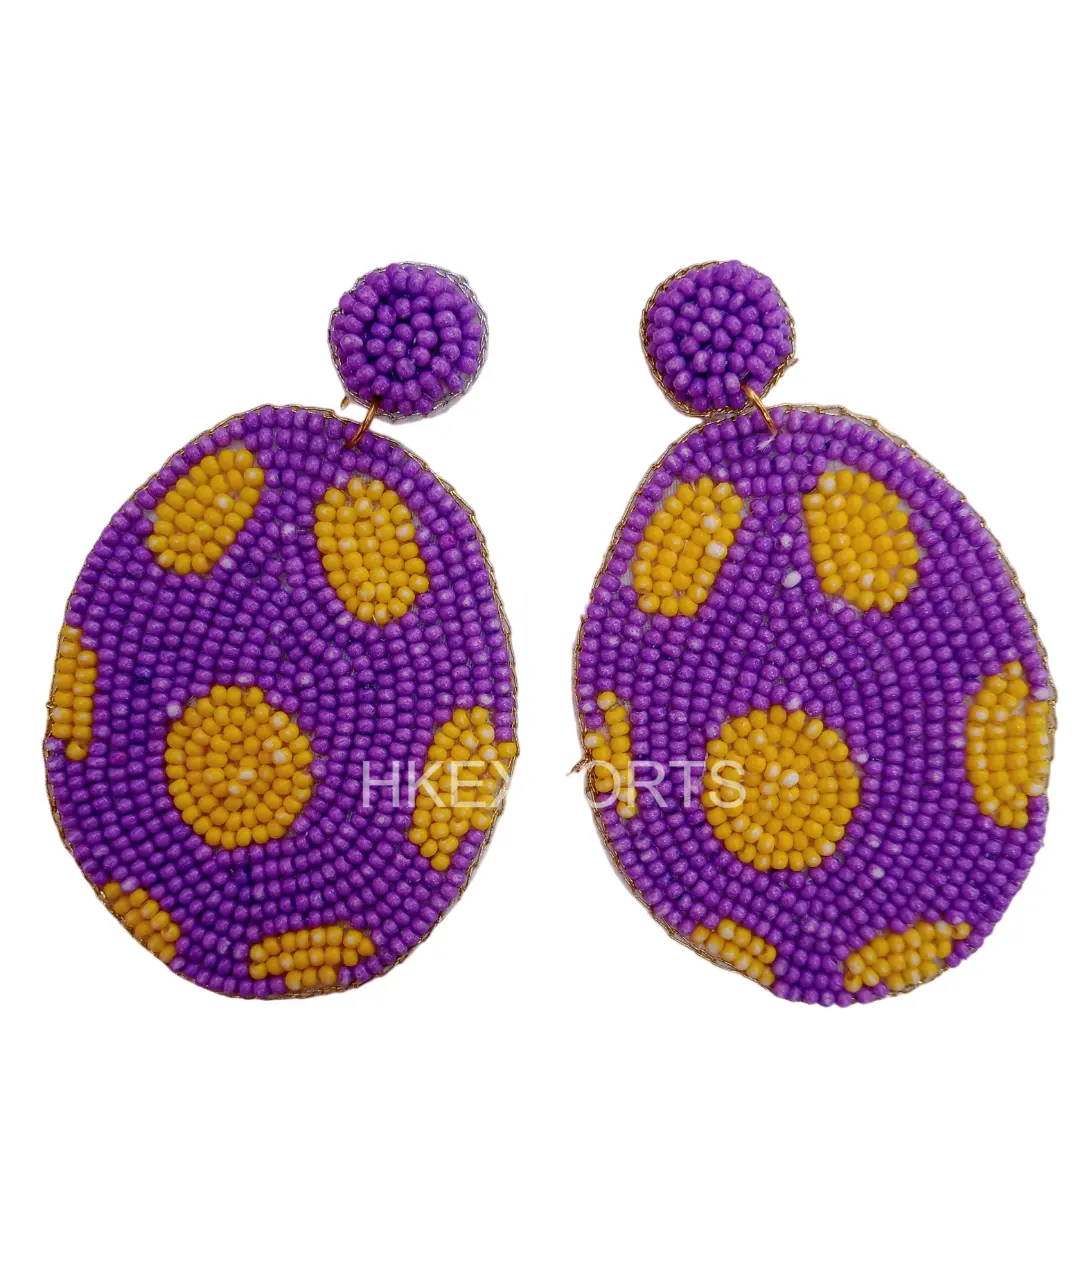 Handcrafted Colorful Springtime Beaded Easter Egg Drop Earrings - Vibrant Holiday Fashion Statement Accessories